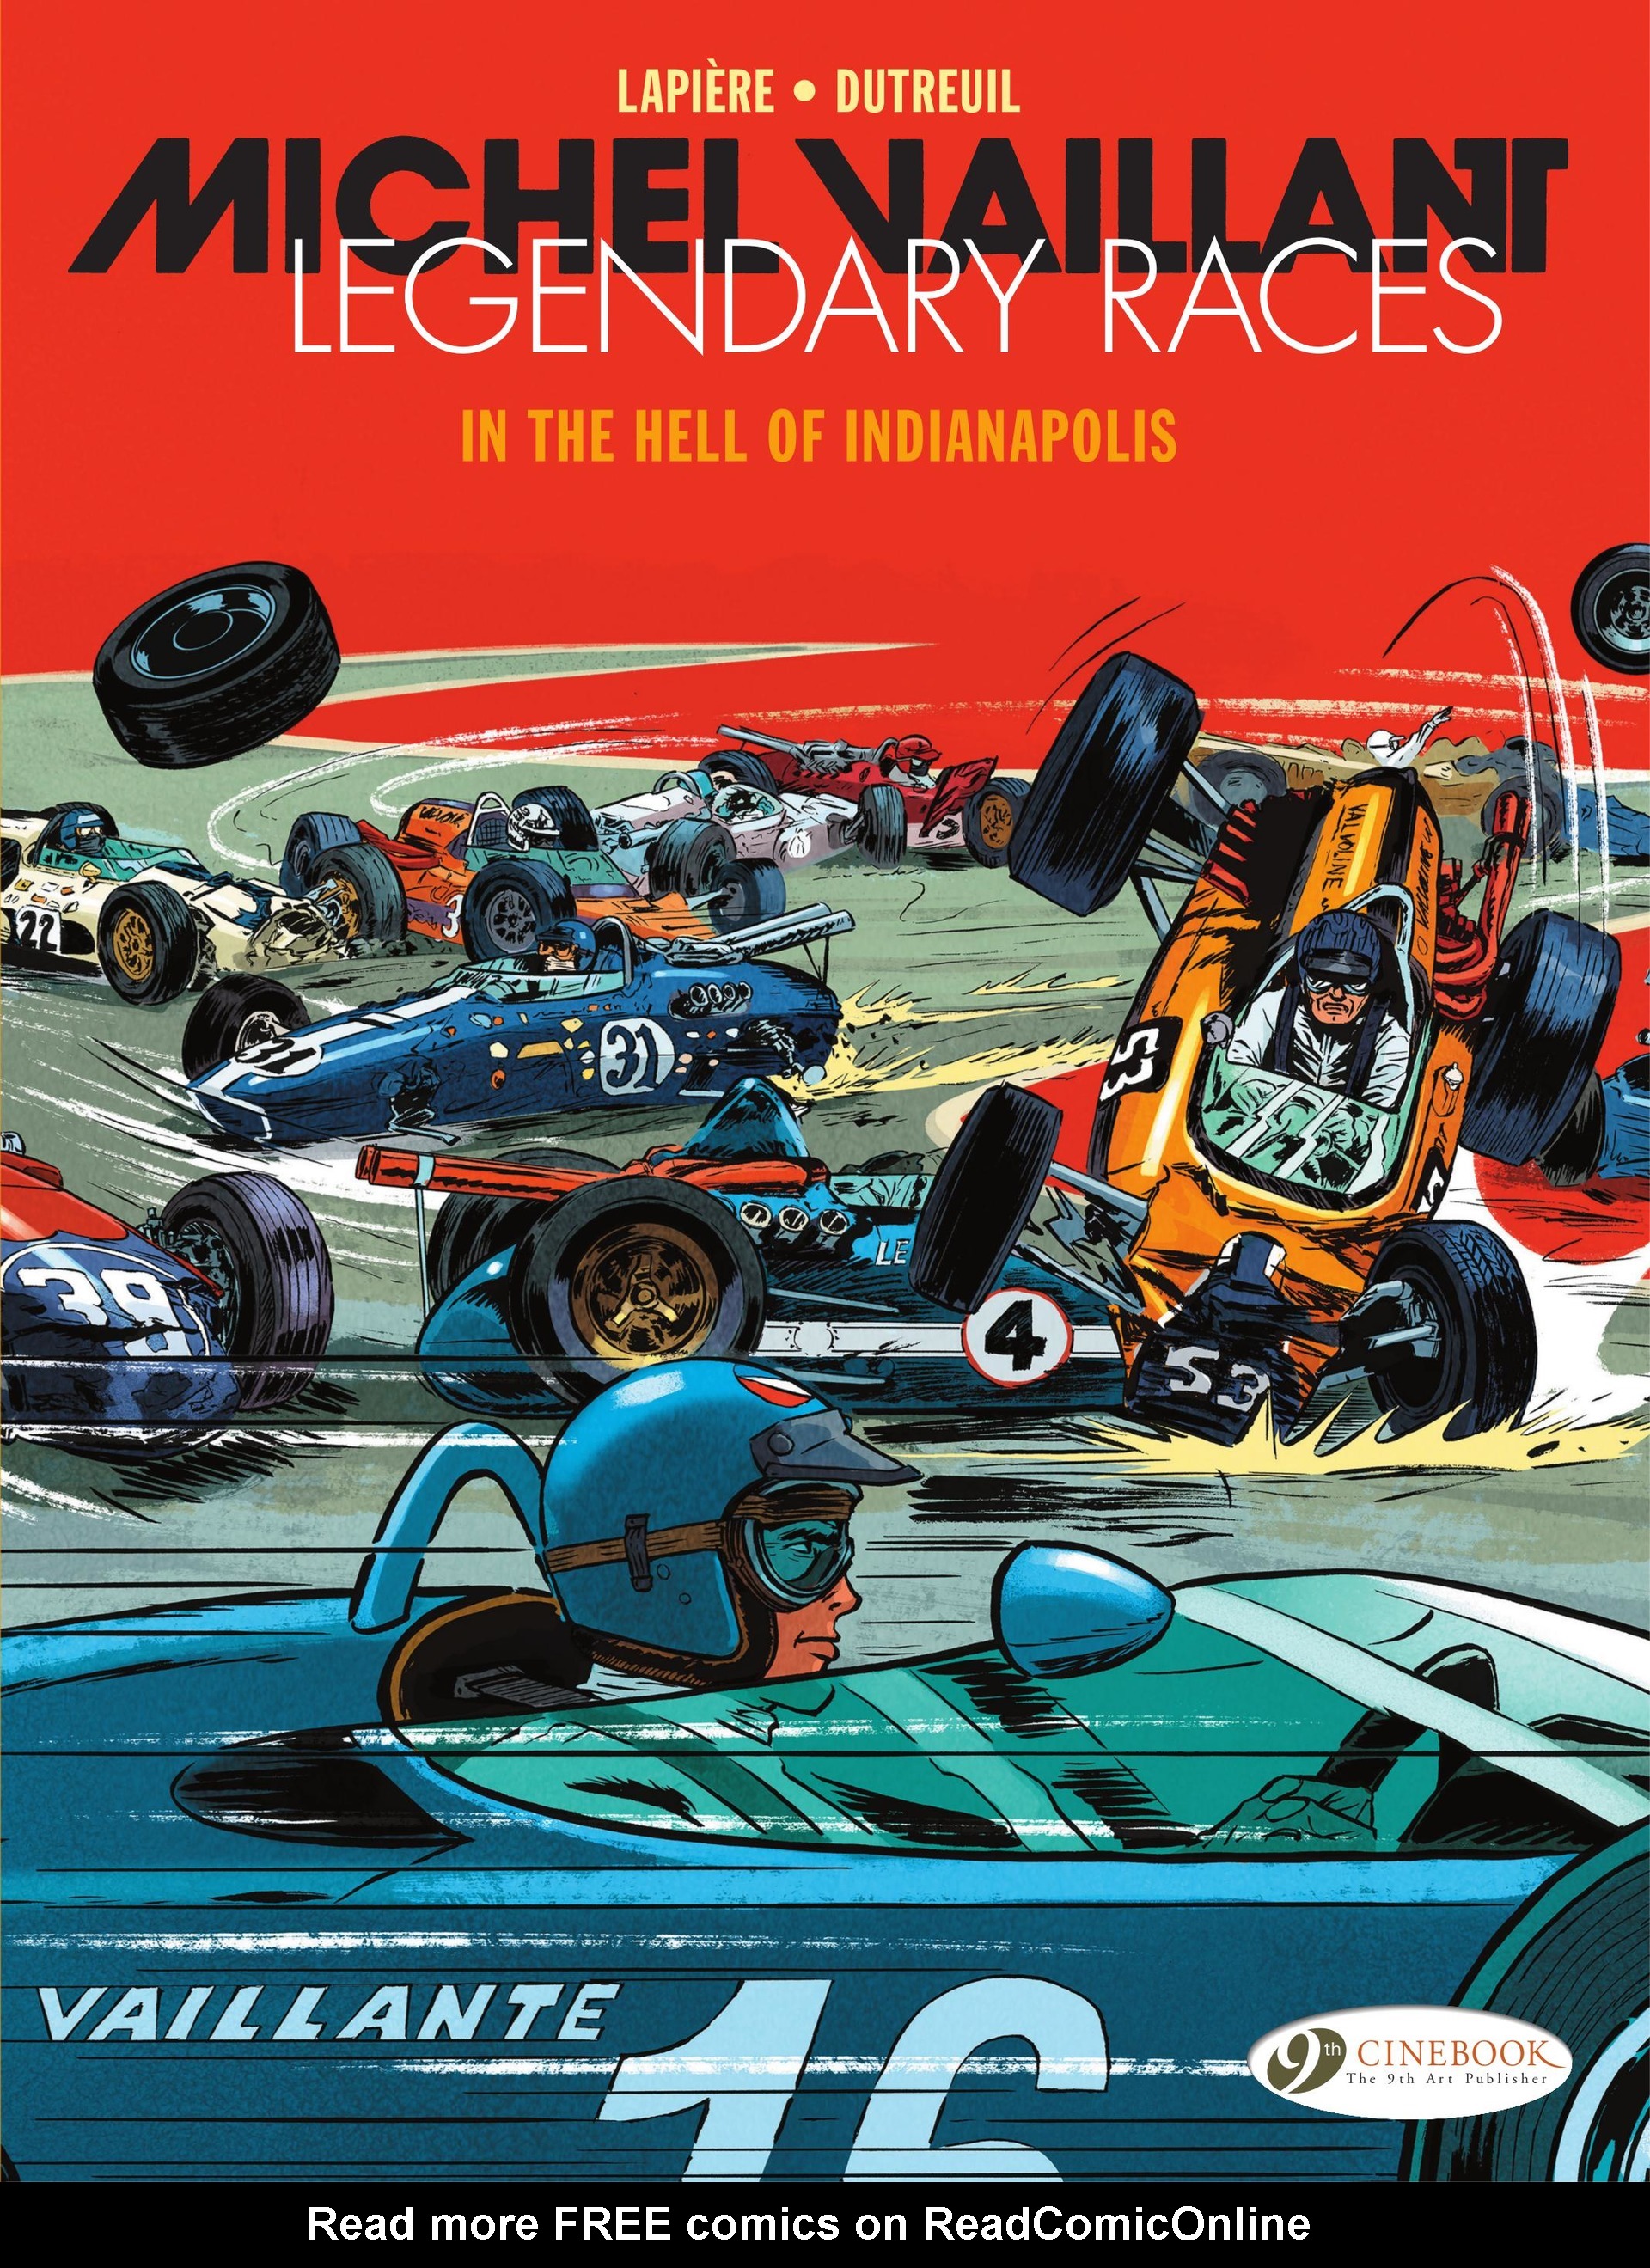 Read online Michel Vaillant: Legendary Races: In the Hell of Indianapolis comic -  Issue # Full - 1